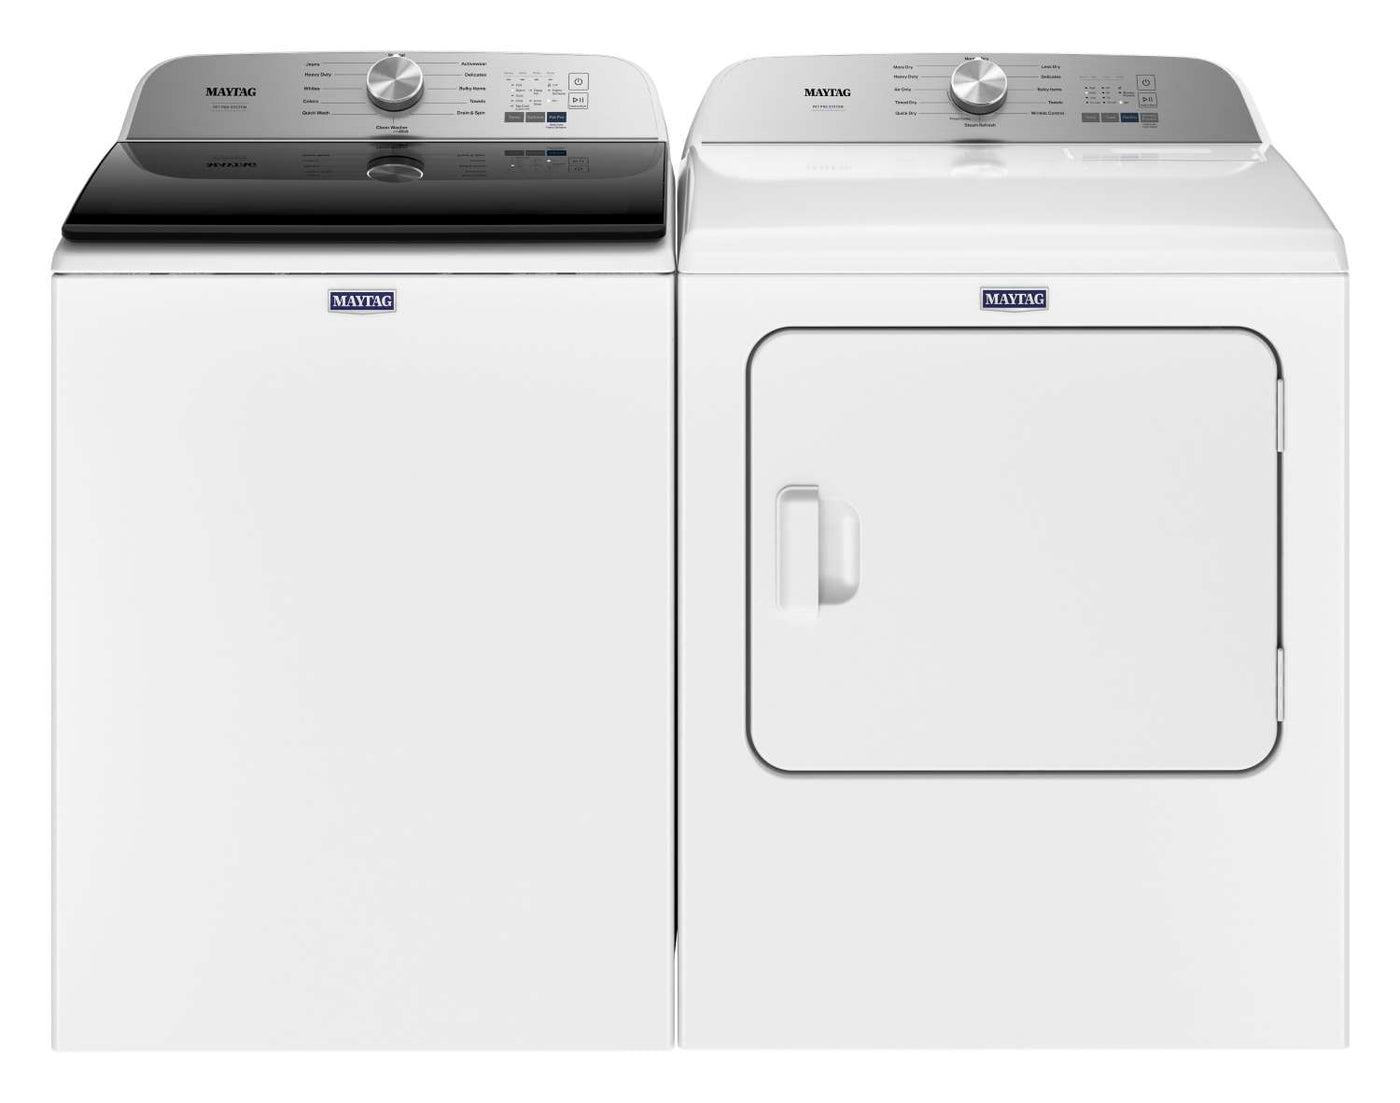 Maytag White Top-Load Washer (5.4 cu. ft.) & Electric Dryer (7.0 cu. ft.) - MVW6500MW/YMED6500MW